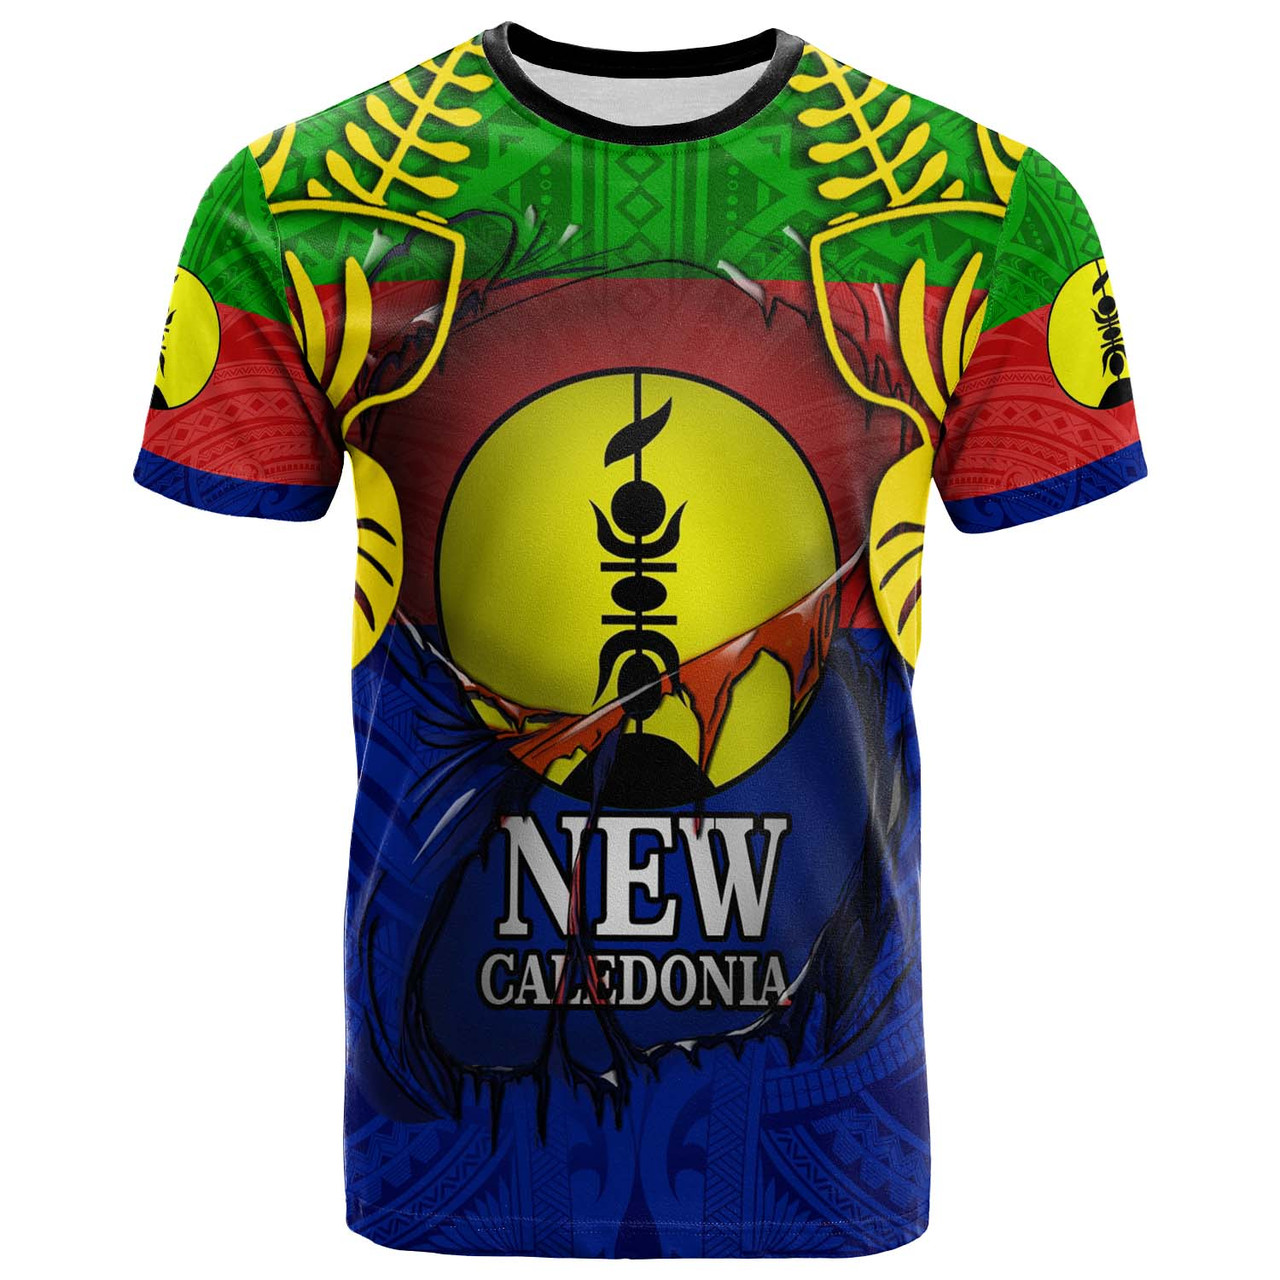 New Caledonia T-shirt - Custom Personalised Coat of Arms Ripping with Polynesian T-shirt